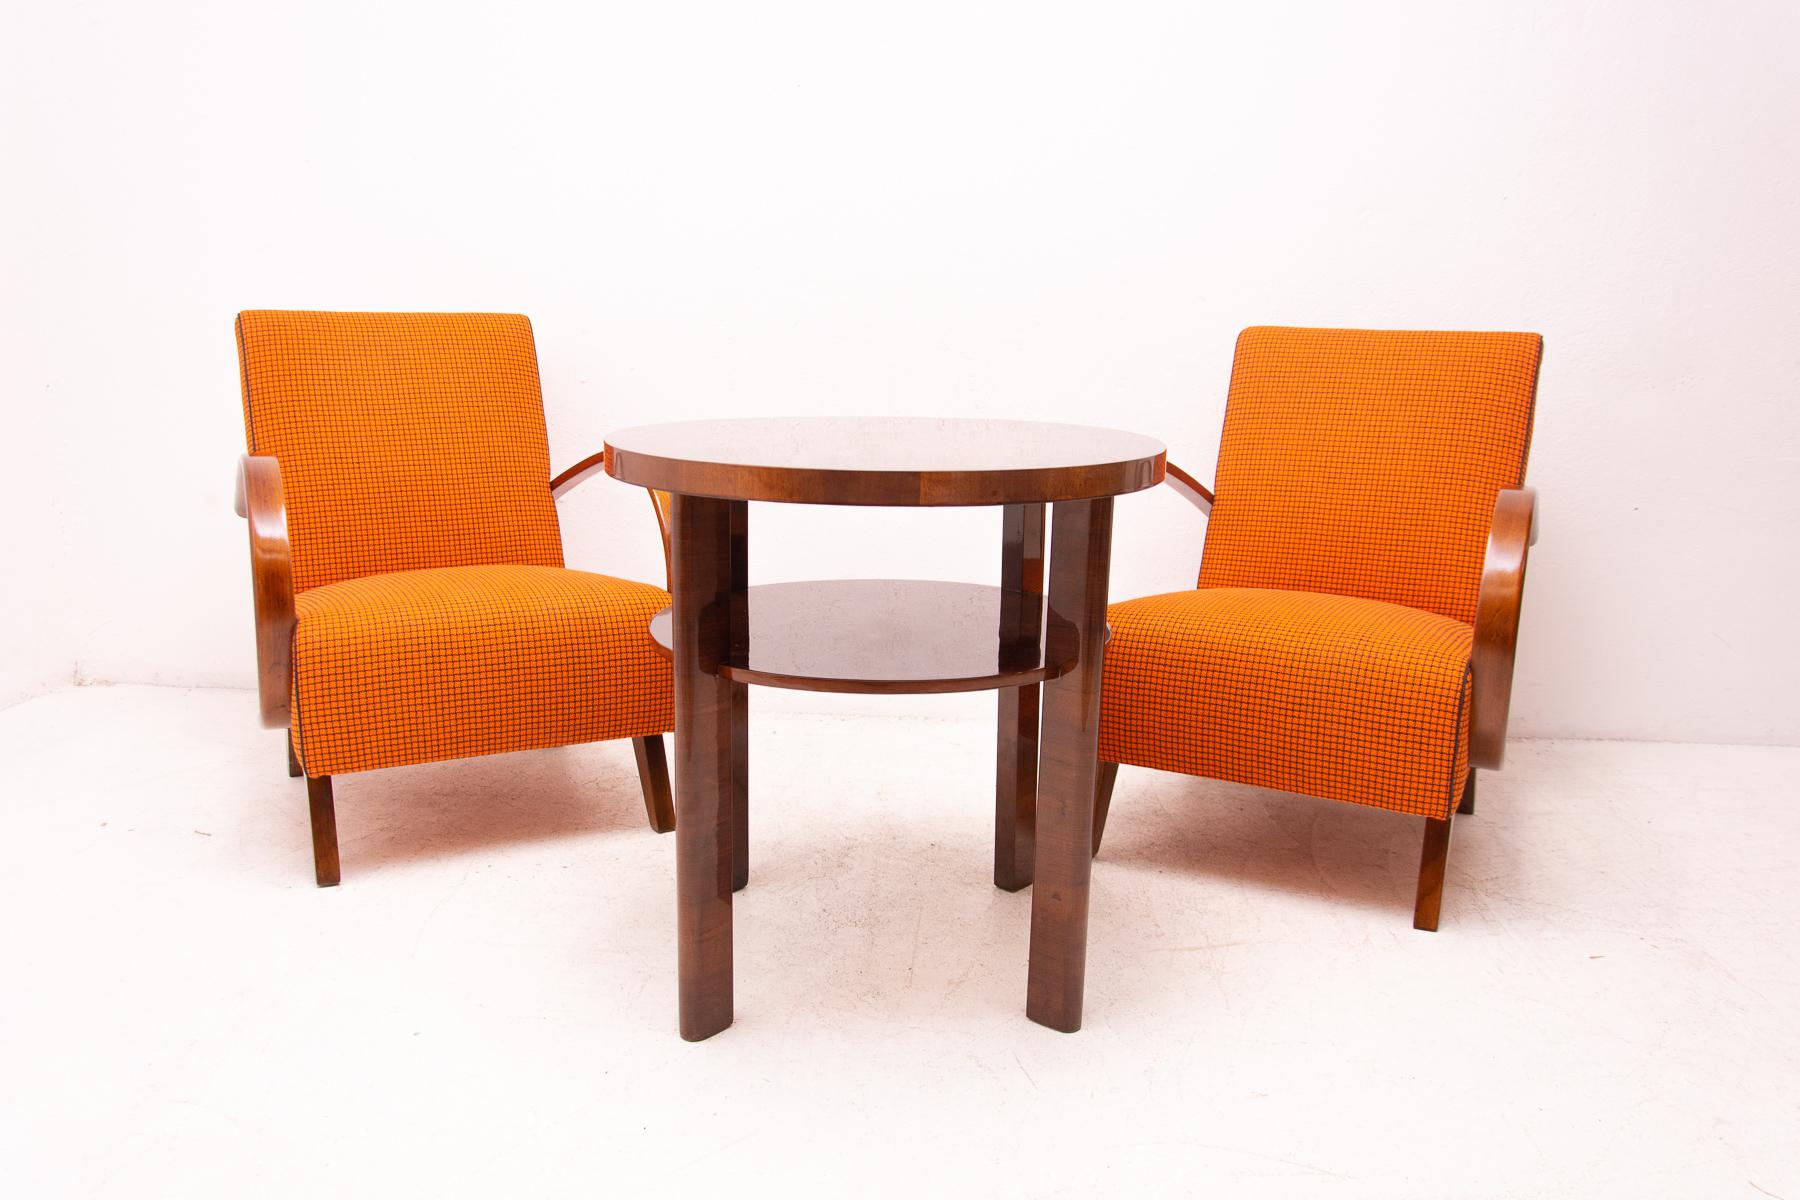 This pair of bentwood armchairs “C” was designed by Jindrich Halabala and were produced by UP Závody in the 1950´s. The chairs are stable and comfortable and in excellent condition thanks to a complete renovation. New upholstery, the wood was